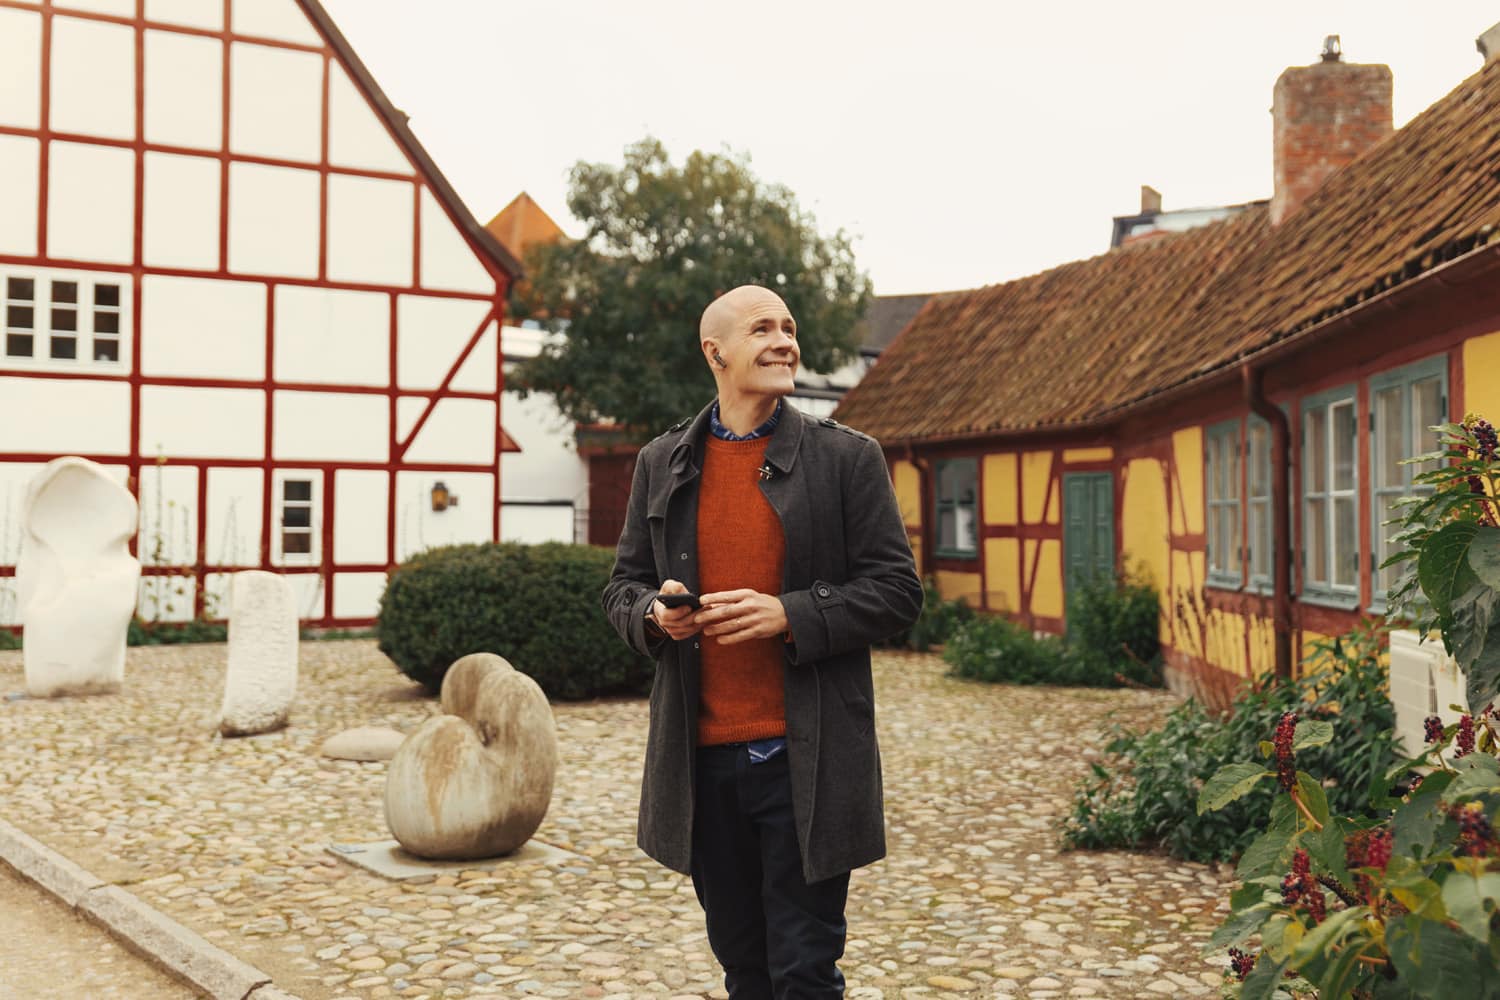 A man is standing by two half-timbered houses